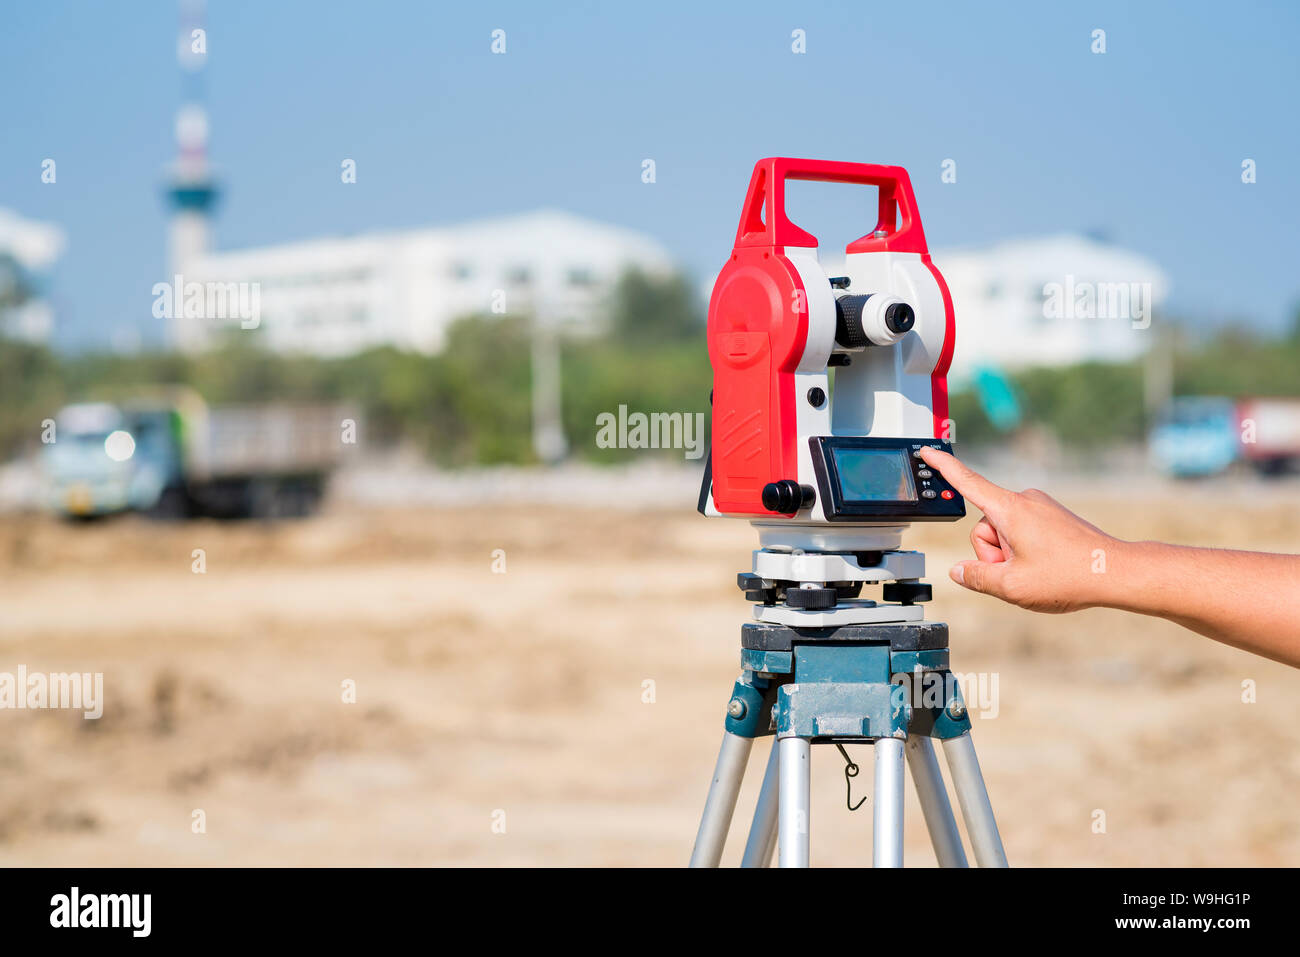 Civil engineer use surveyor equipment theodolite checking construction site for new Infrastructure project. photo concept for engineering work. Stock Photo